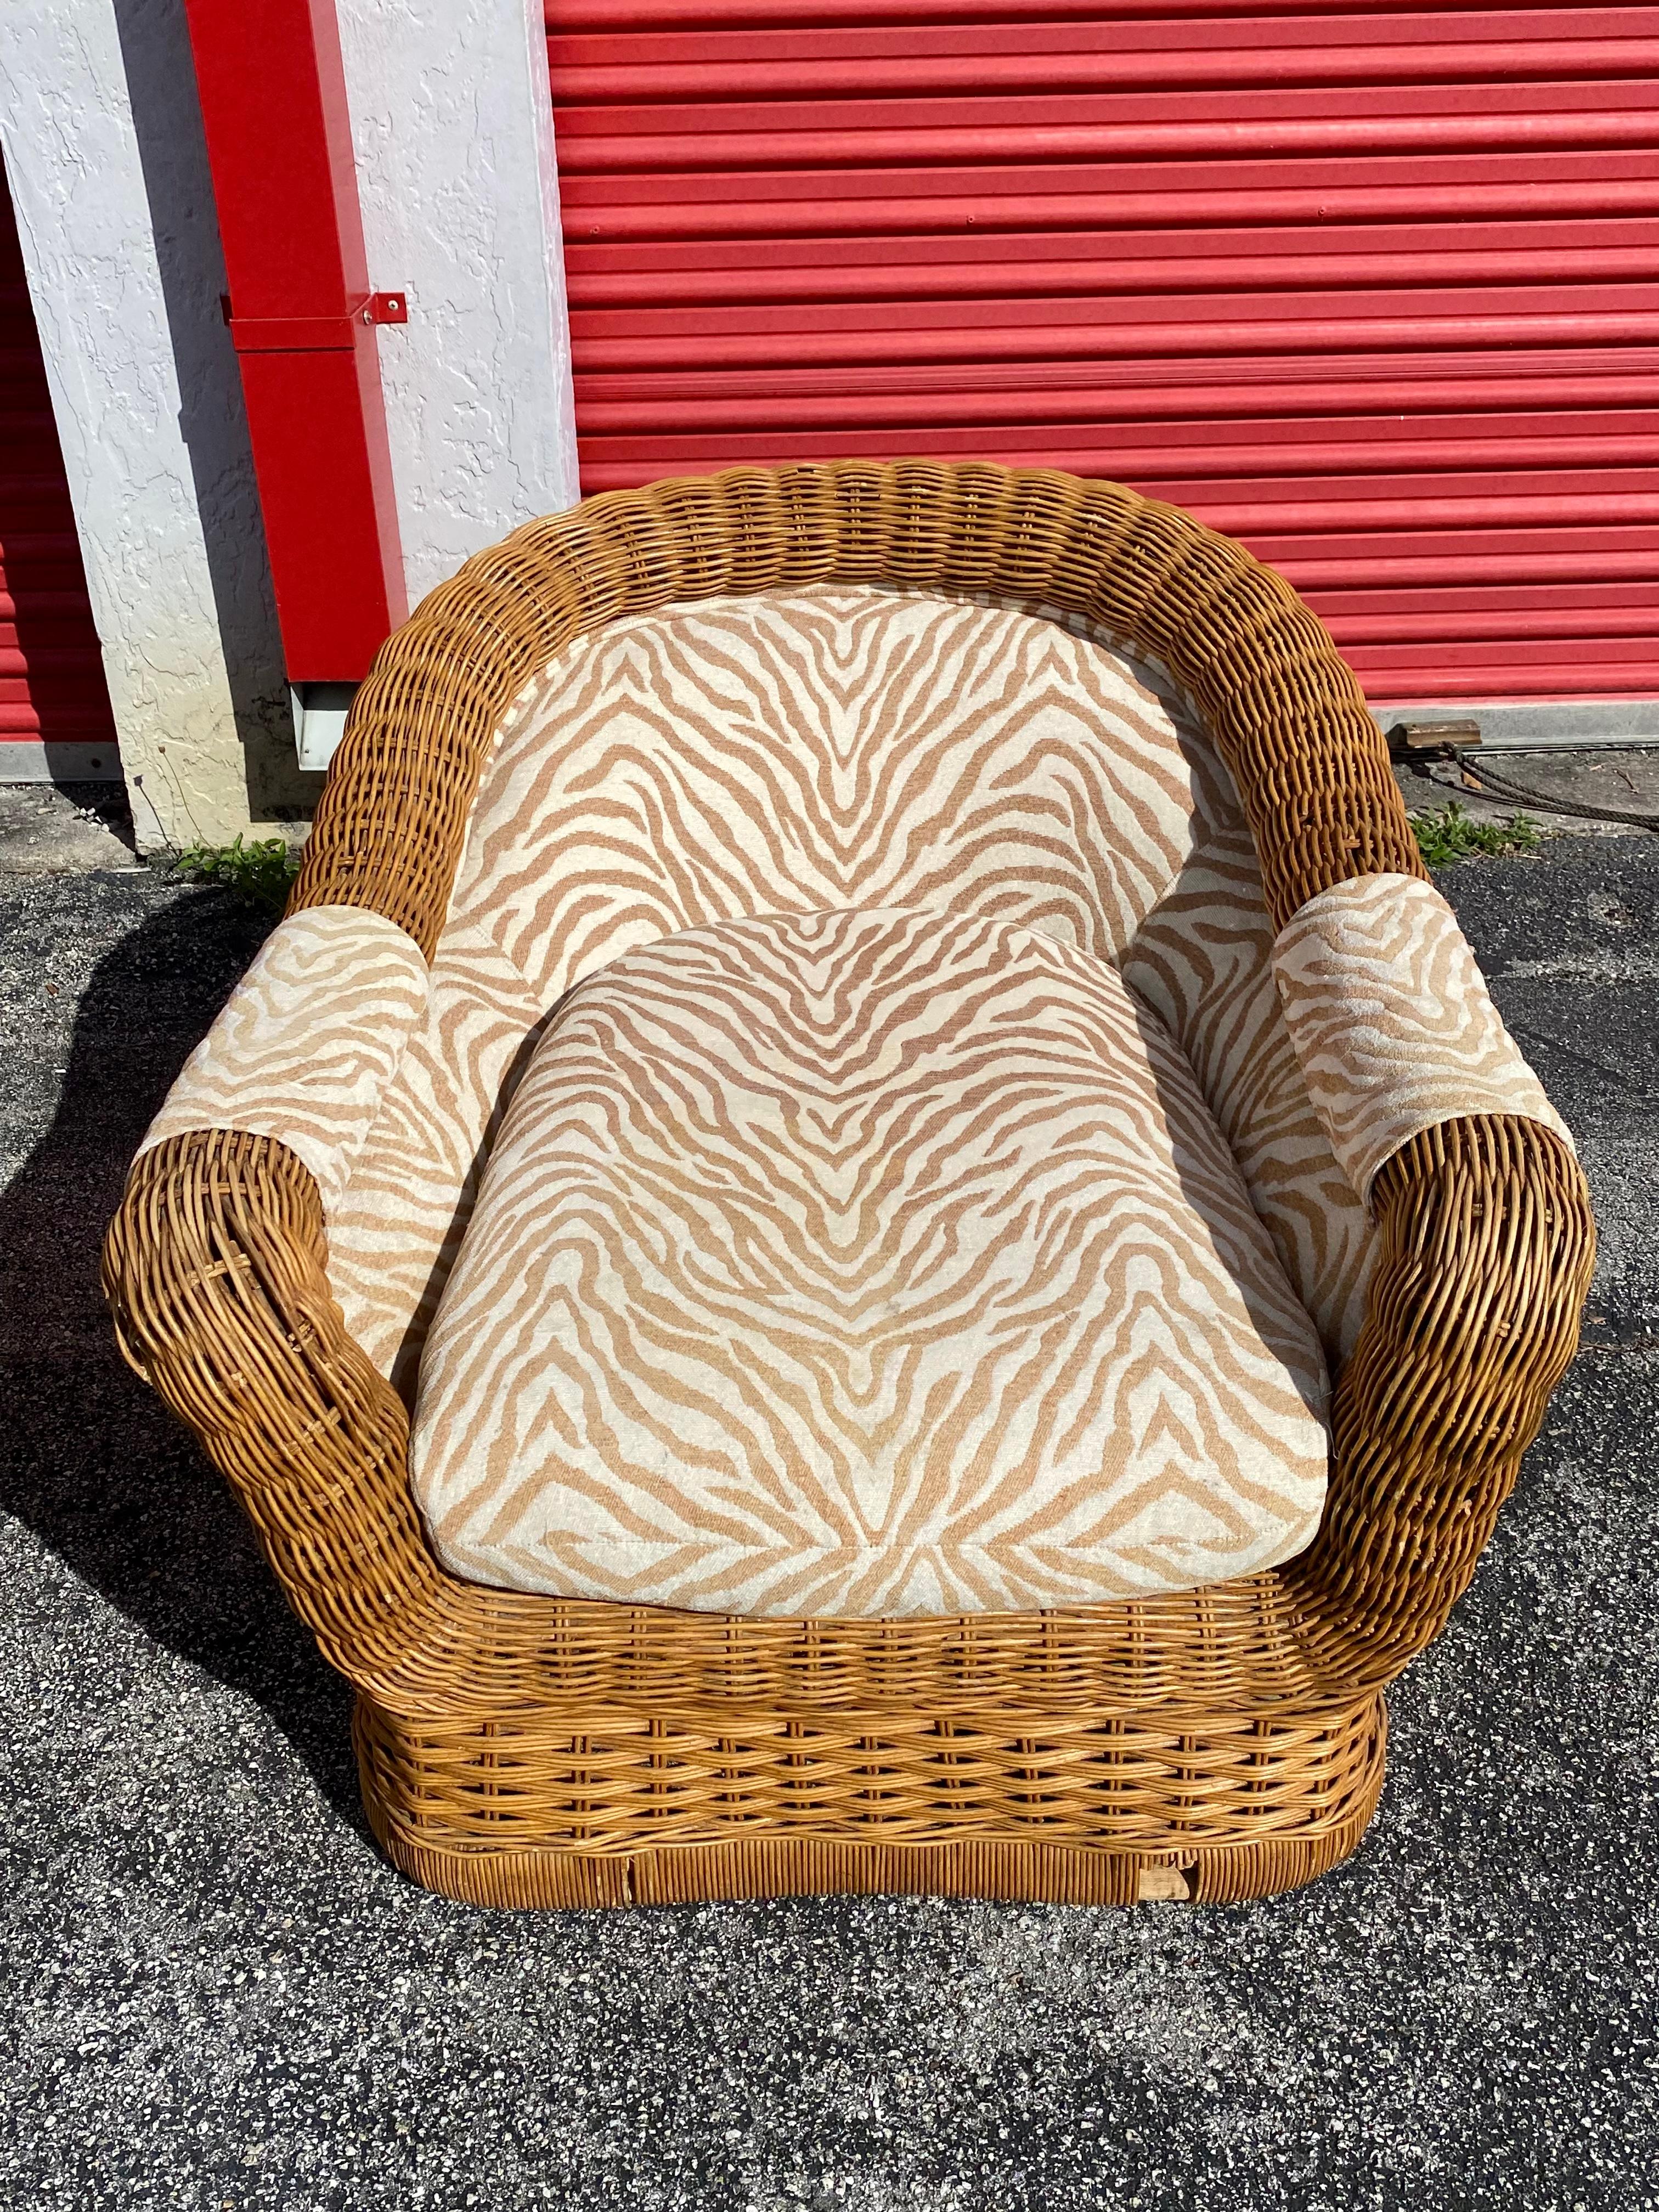 1970s Ficks Reed Woven Rattan Zebra Chairs and Ottomans, Set of 4 For Sale 5